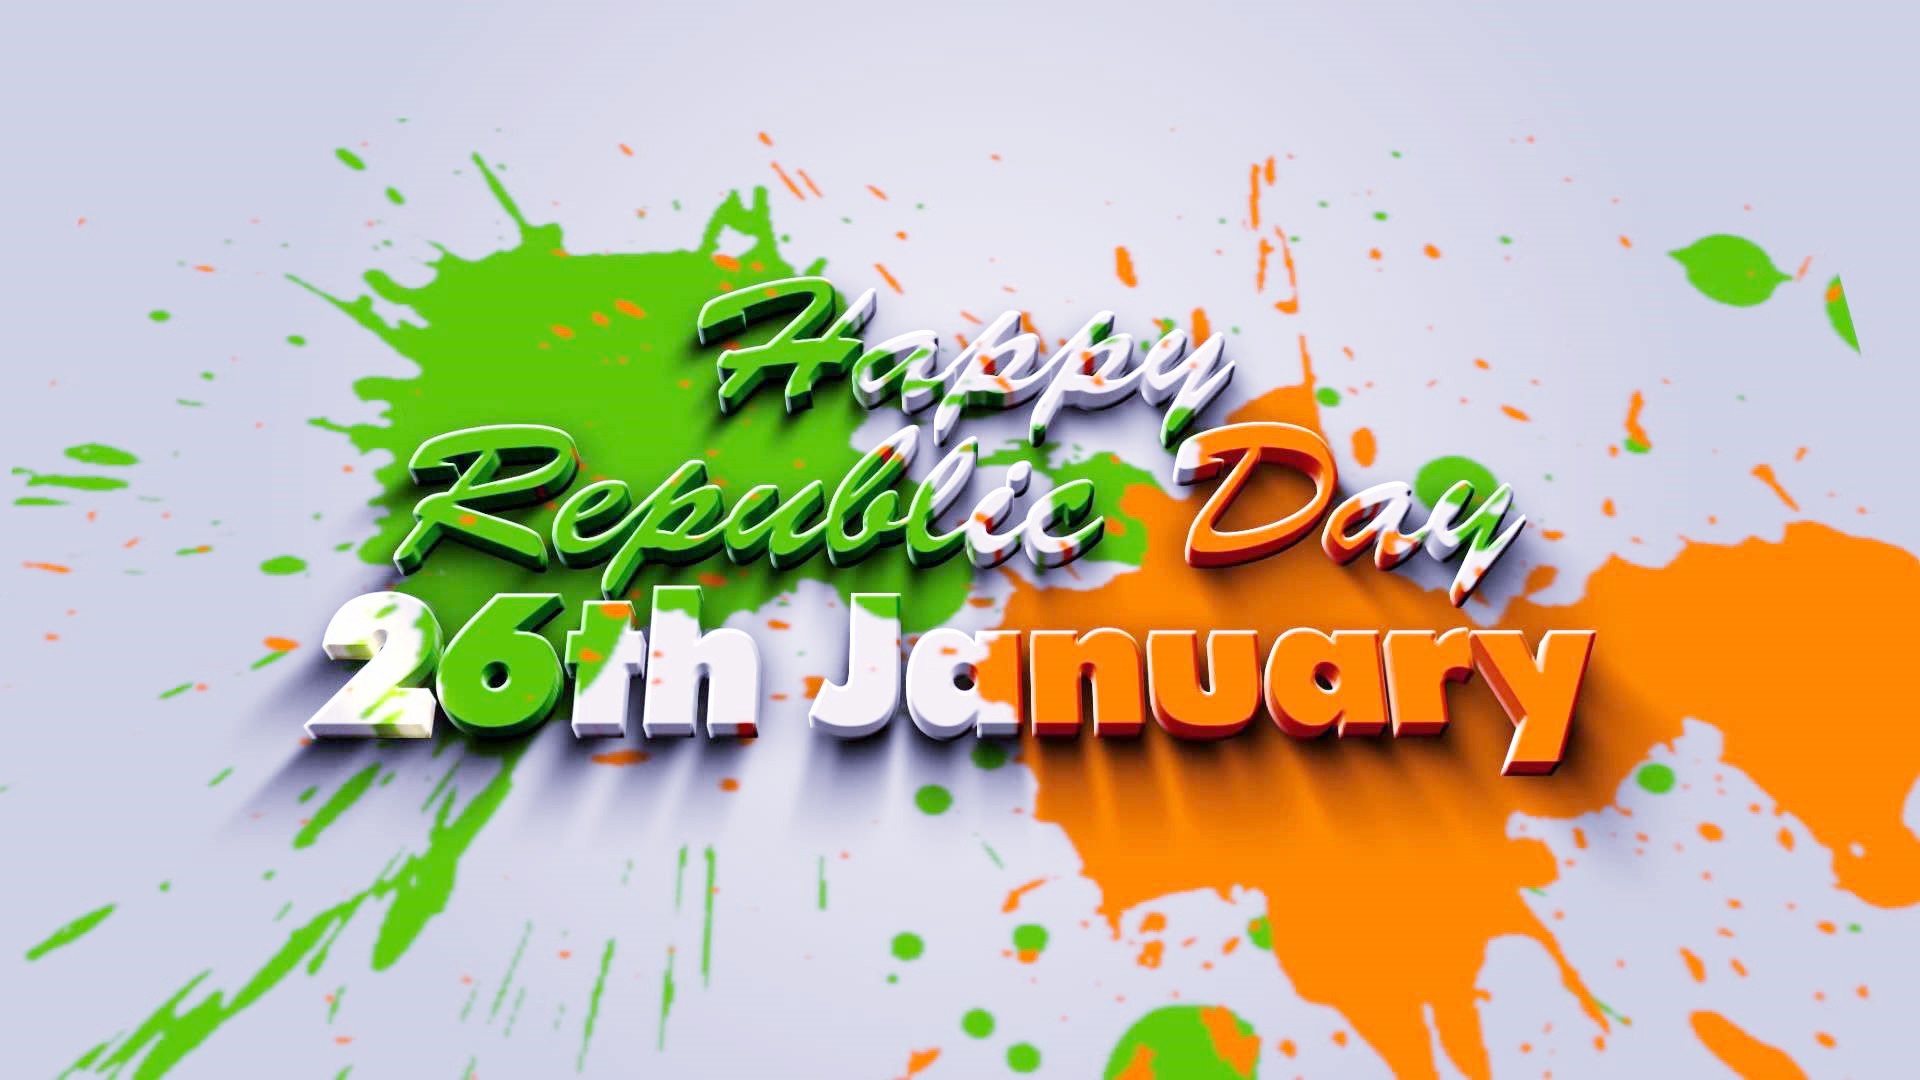 74th}* Republic Day Images, GIF, HD Wallpapers, Pics & Photos for Whatsapp  DP & Profiles for 26th January 2023